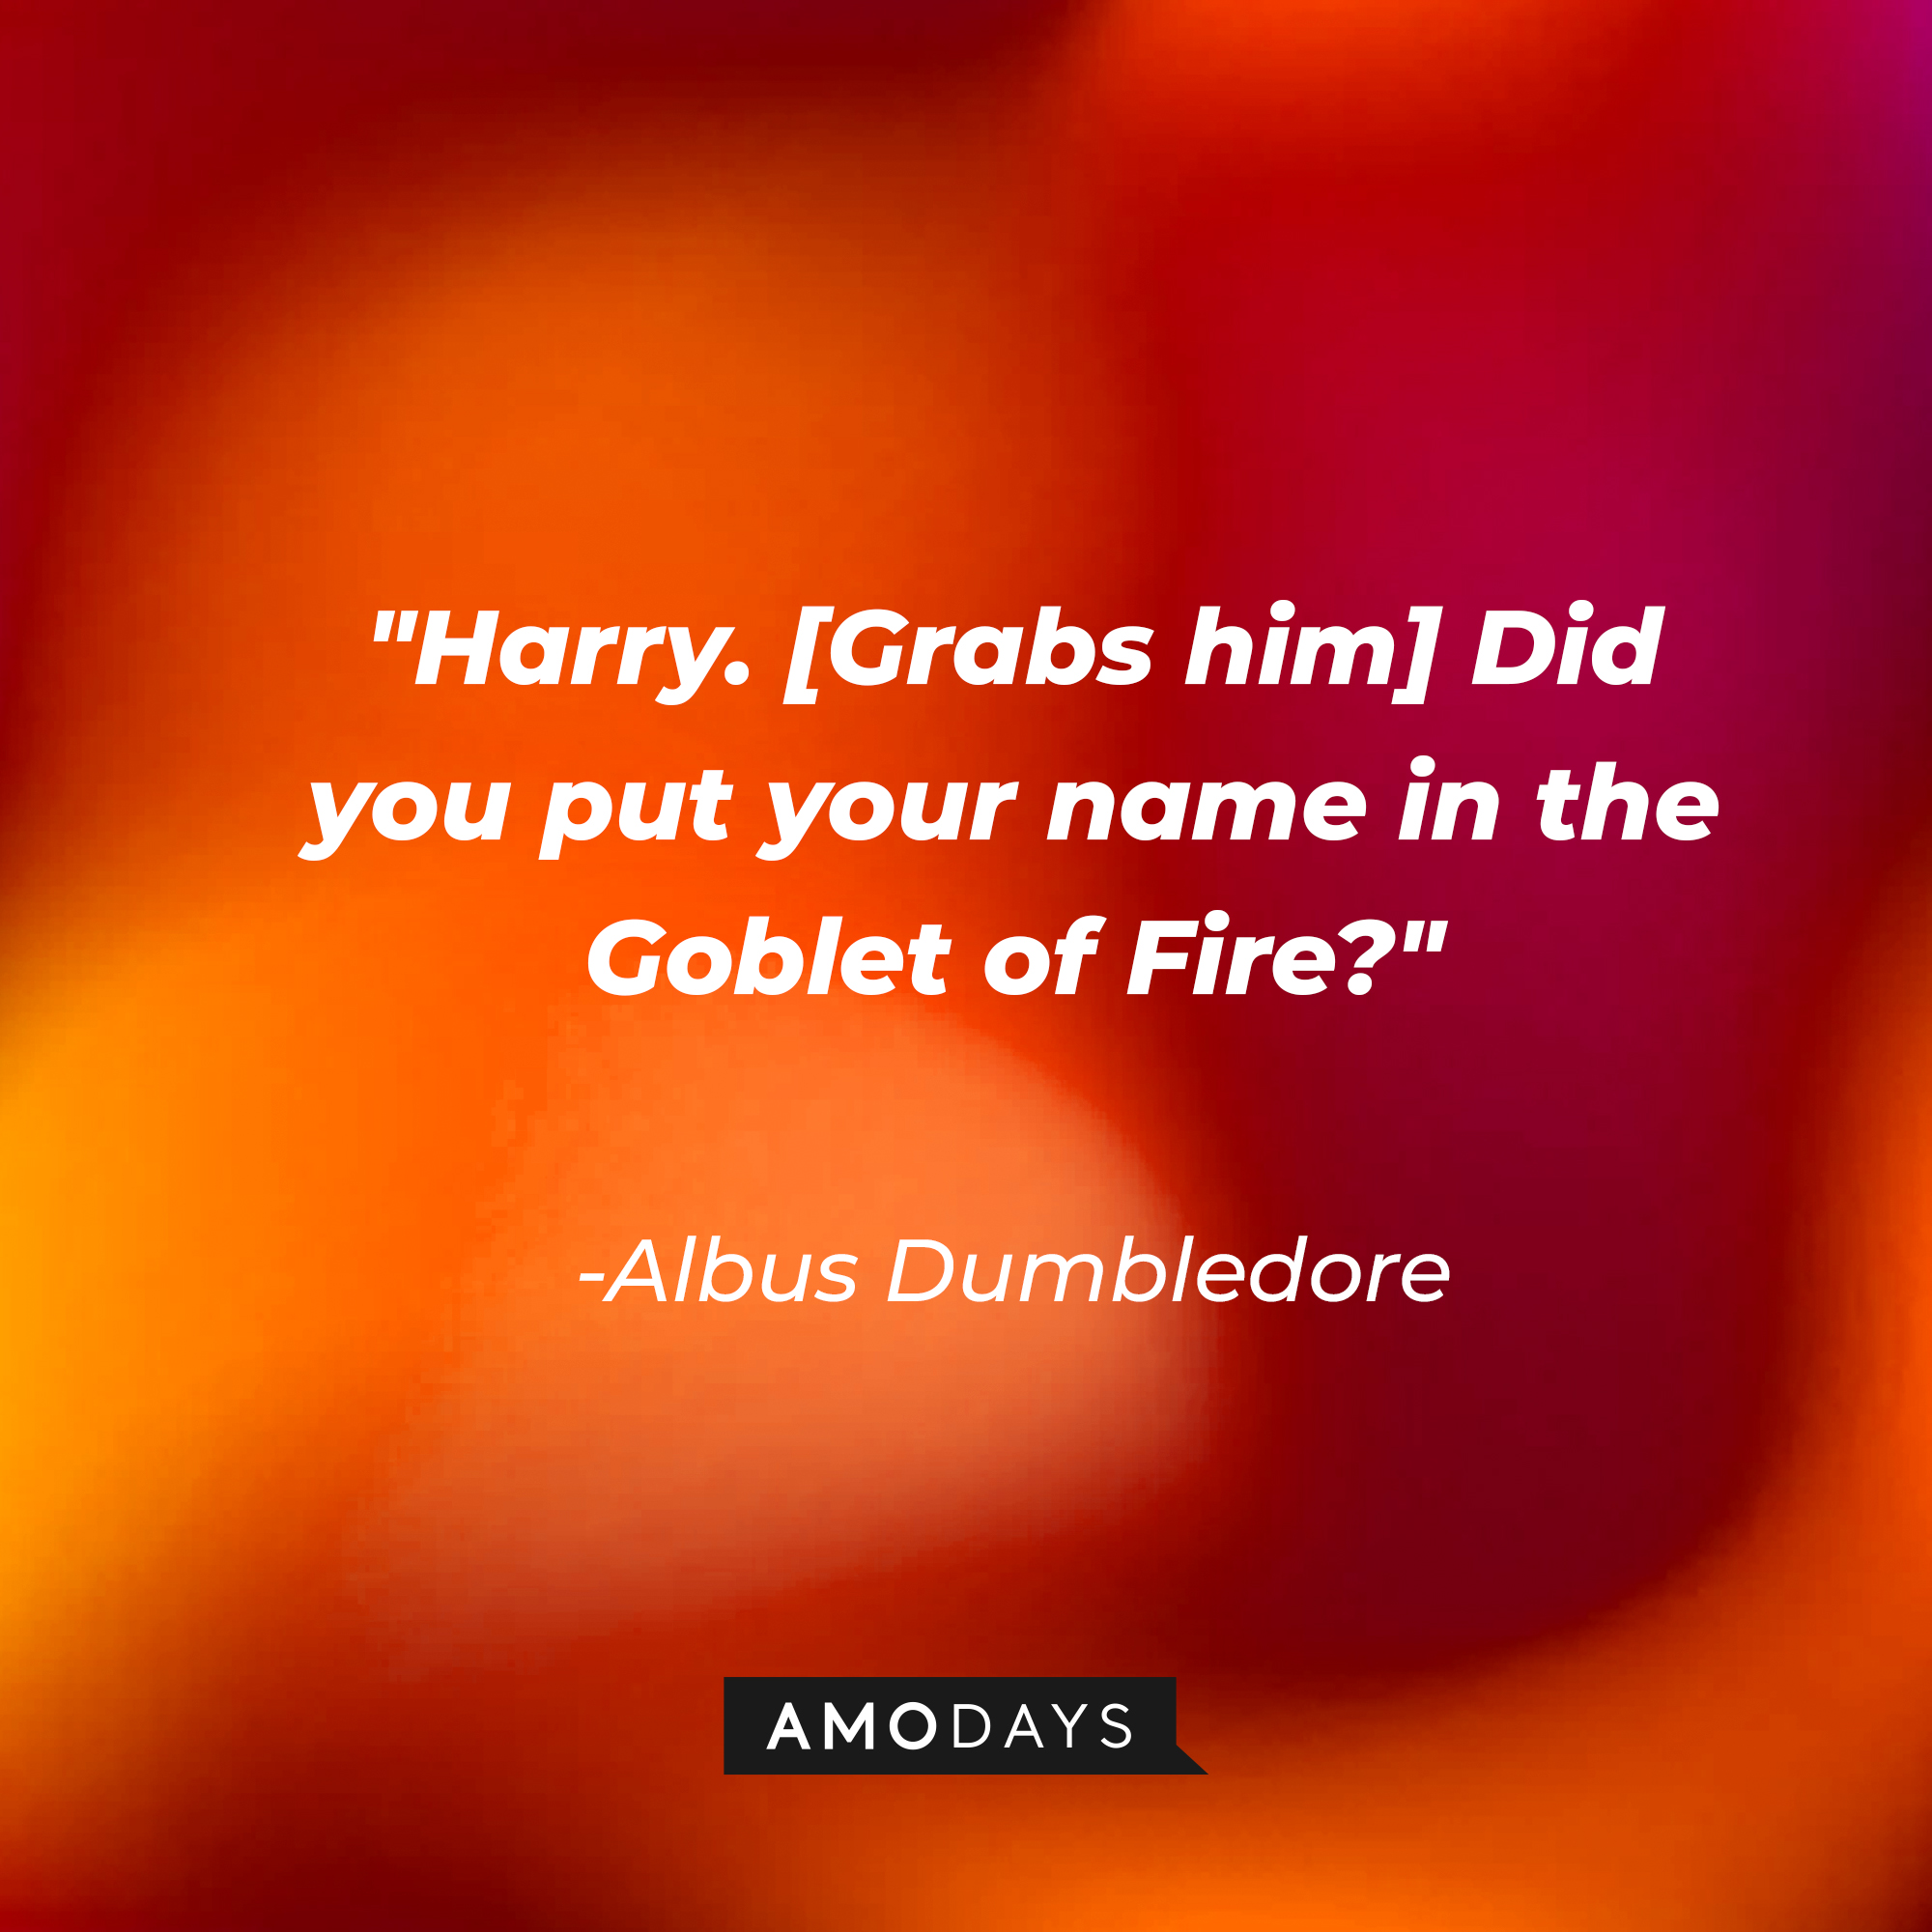 Albus Dumbledore's quote: "Harry. [Grabs him] Did you put your name in the Goblet of Fire?"  | Image: Amodays